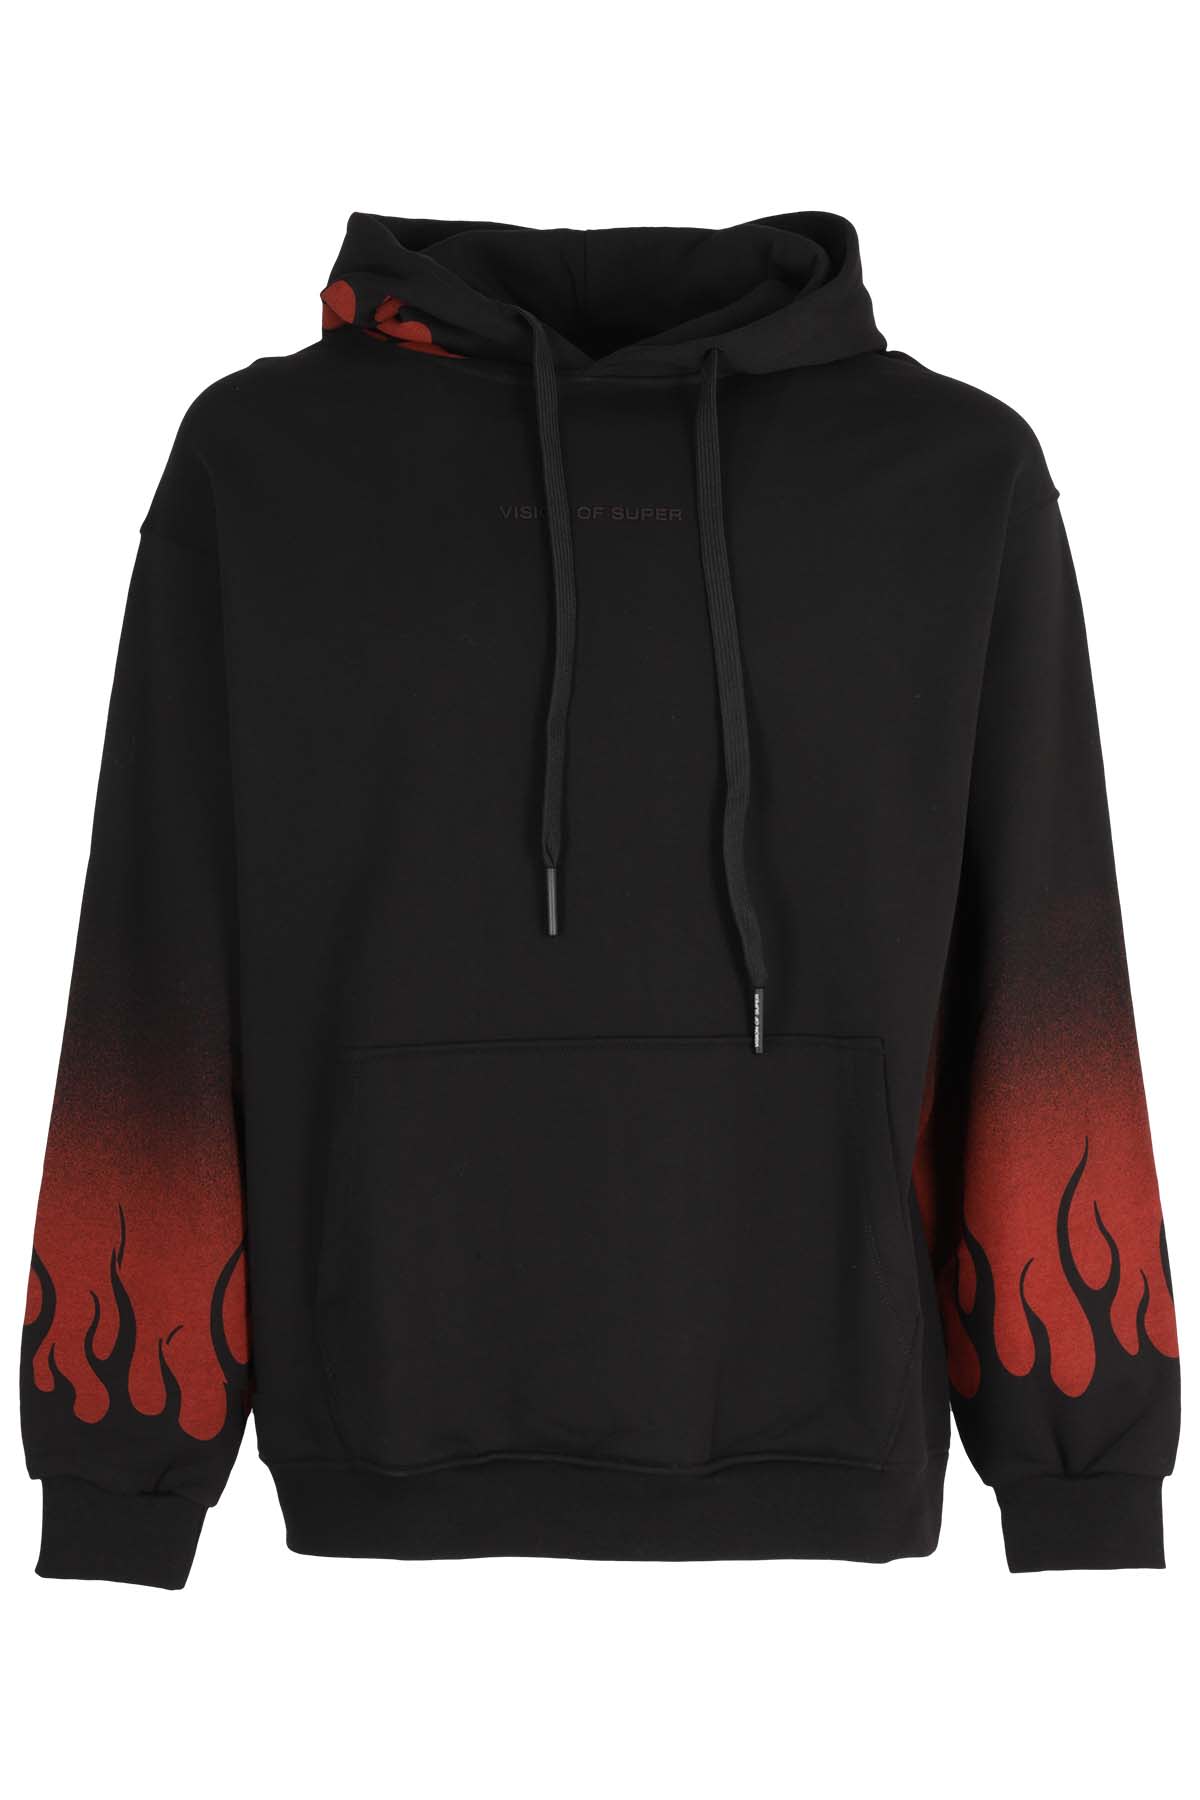 Vision of Super Hoodie Negative Red Flames